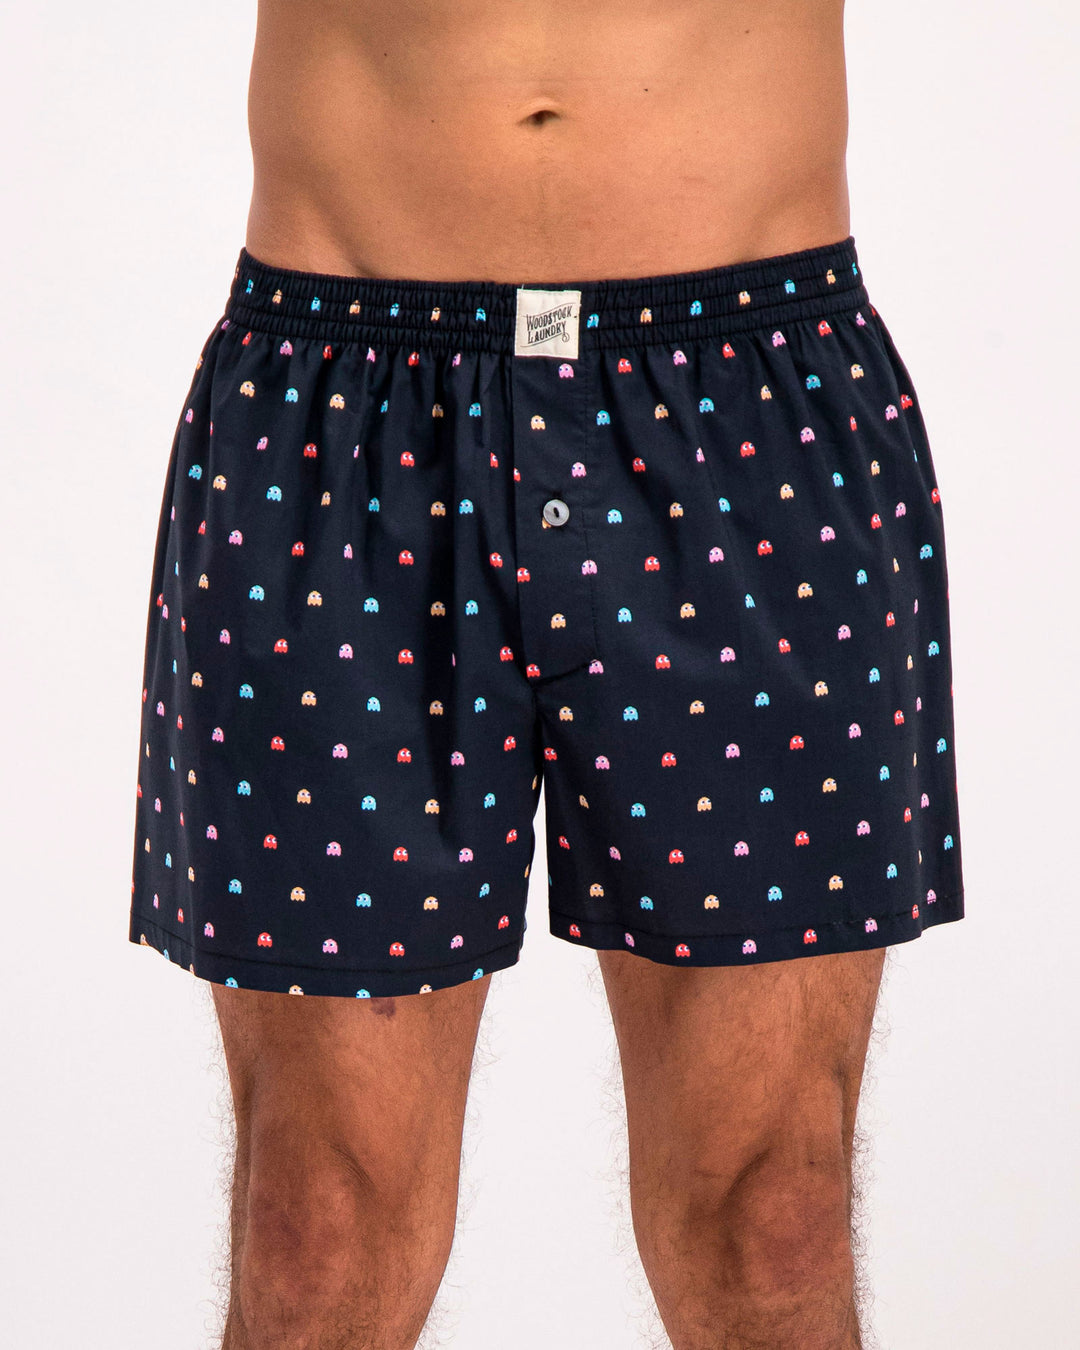 Mens Boxer Shorts P-Ghost Front - Woodstock Laundry